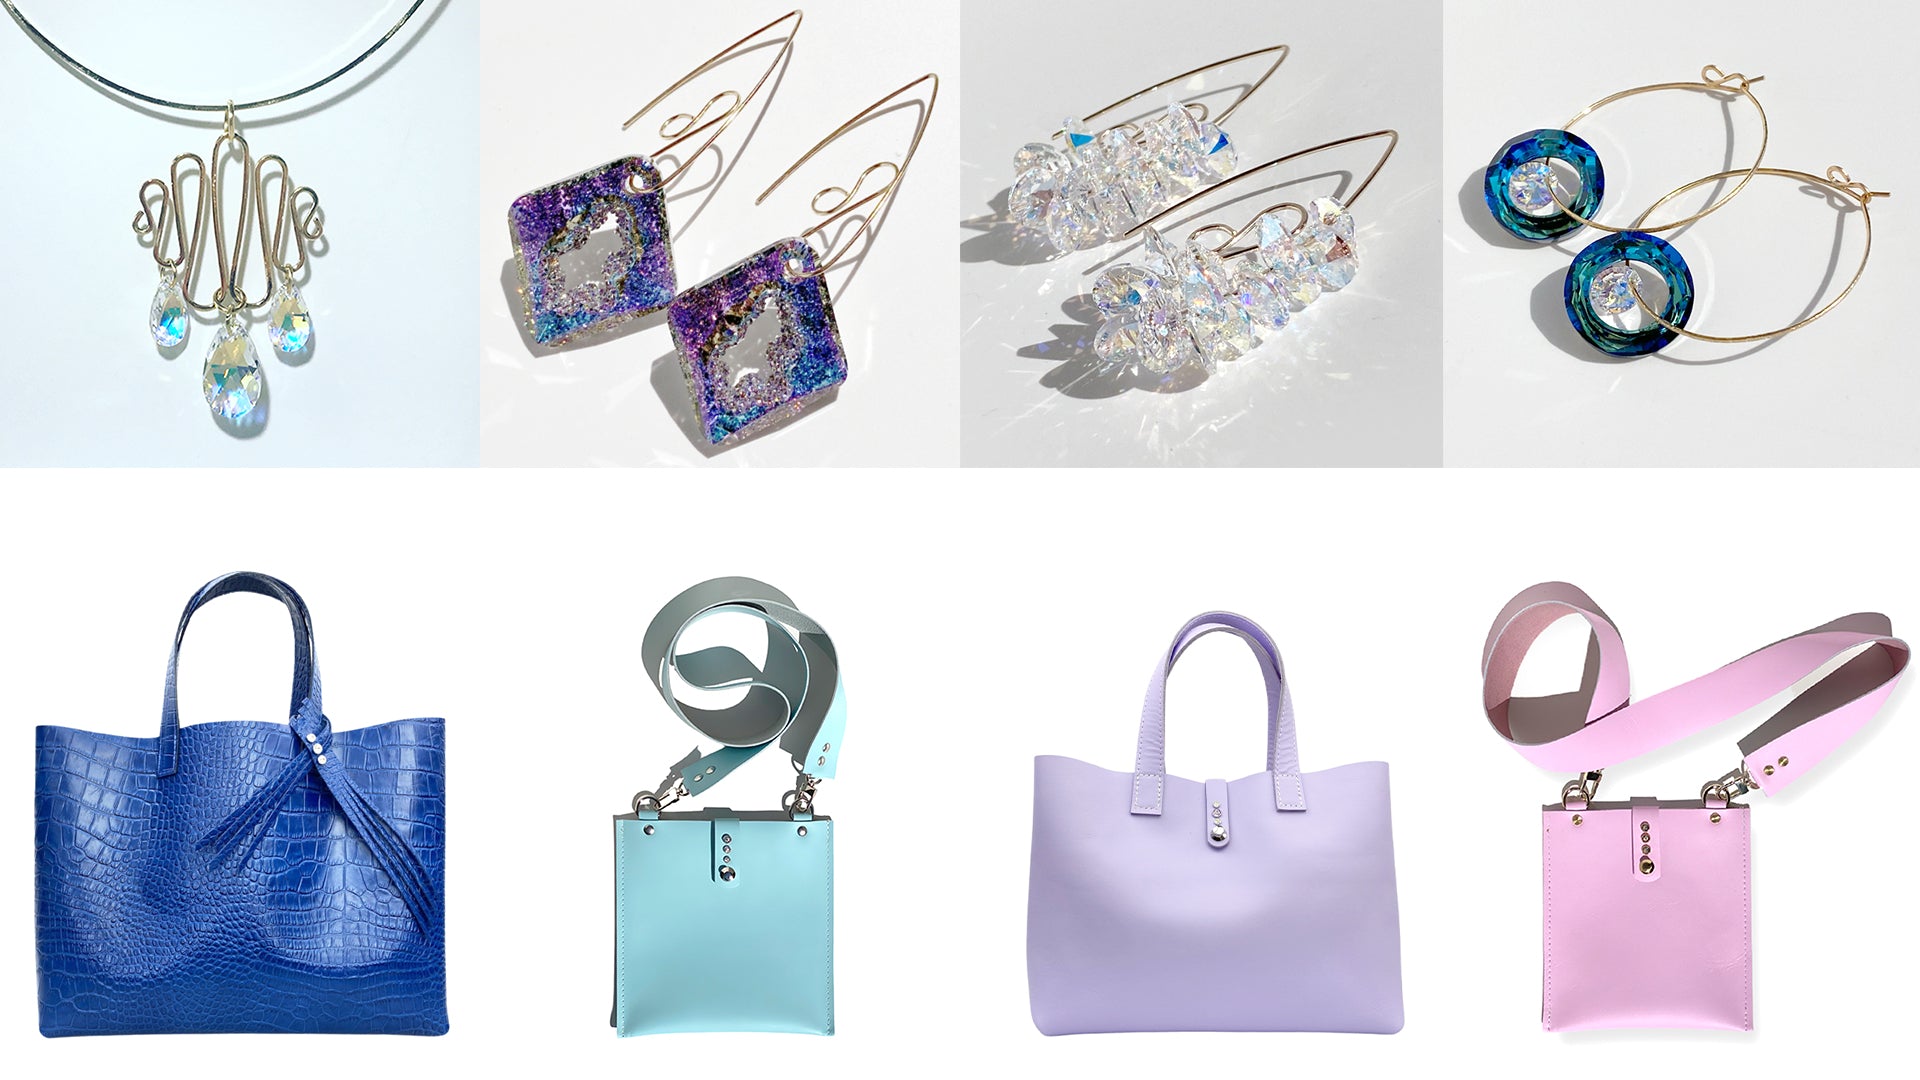 MONOLISA Jewelry and Handbag Collection Designed with Crystals